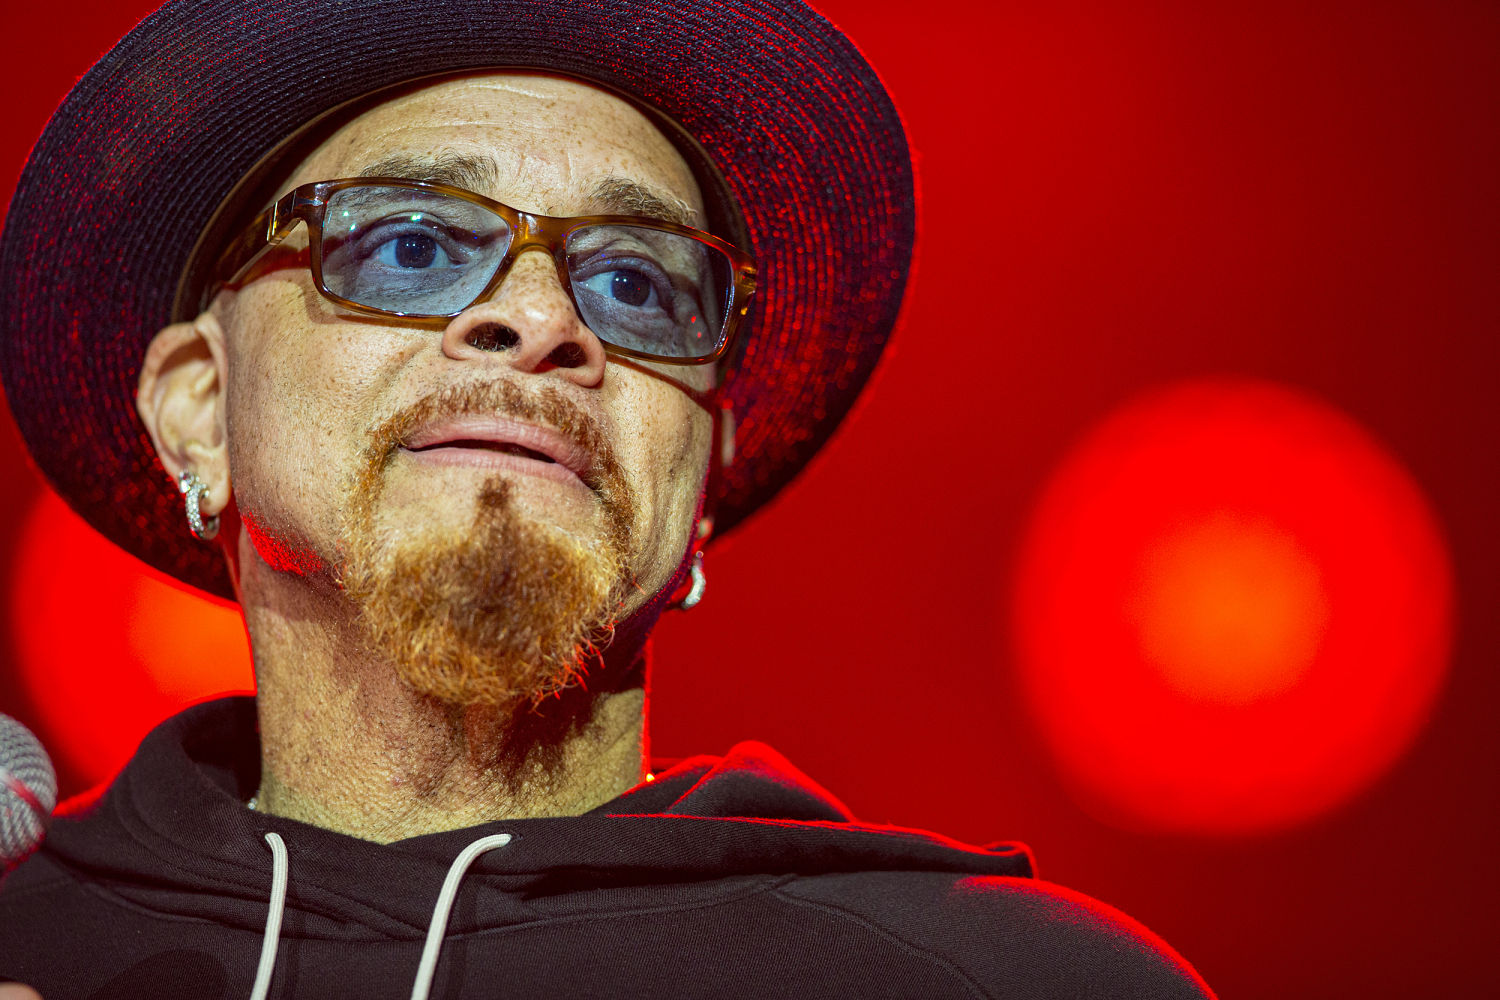 Sinbad thanks fans for support in new video 3 years after stroke: ‘I feel those prayers’ 